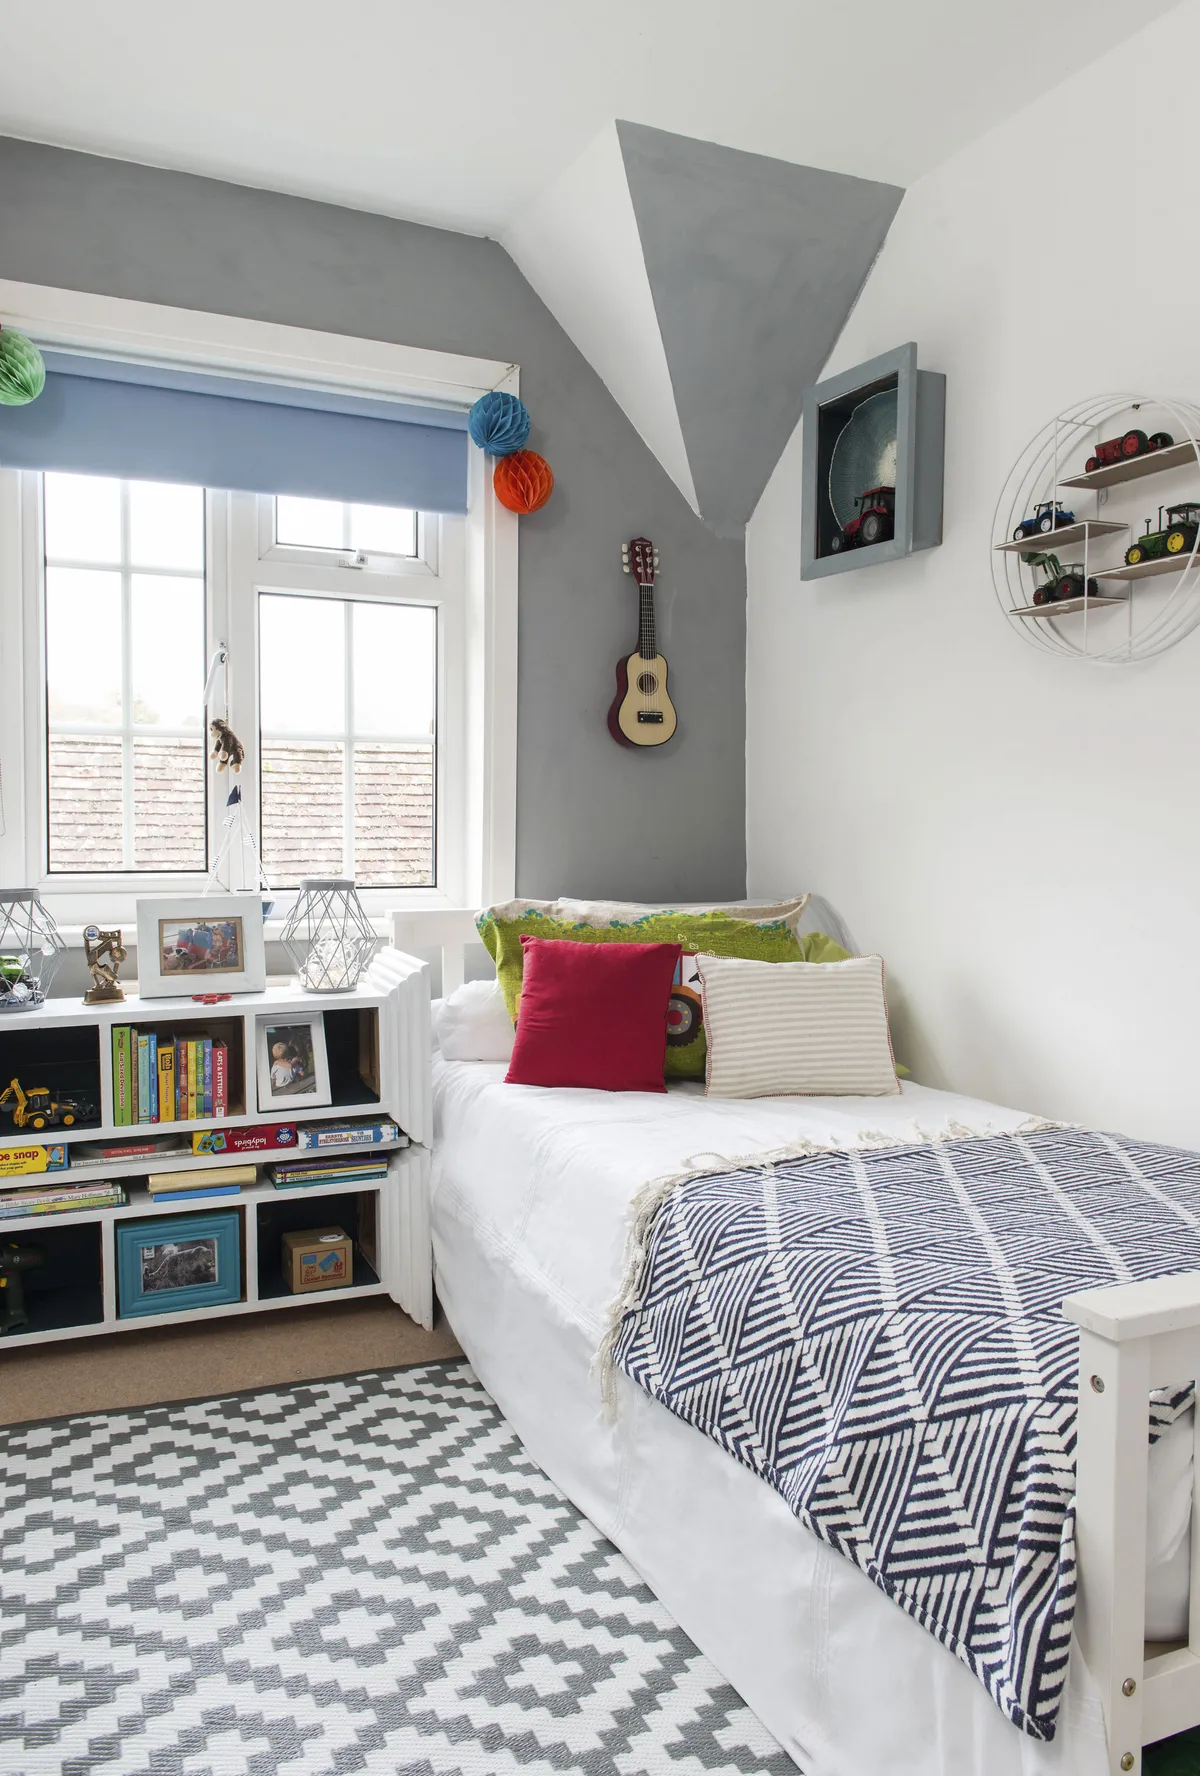 By pairing soft greys and neutrals with bright accents, Danecia has ensured Raydan’s room feels fresh and fun without being too childish, making it a space he can grow into